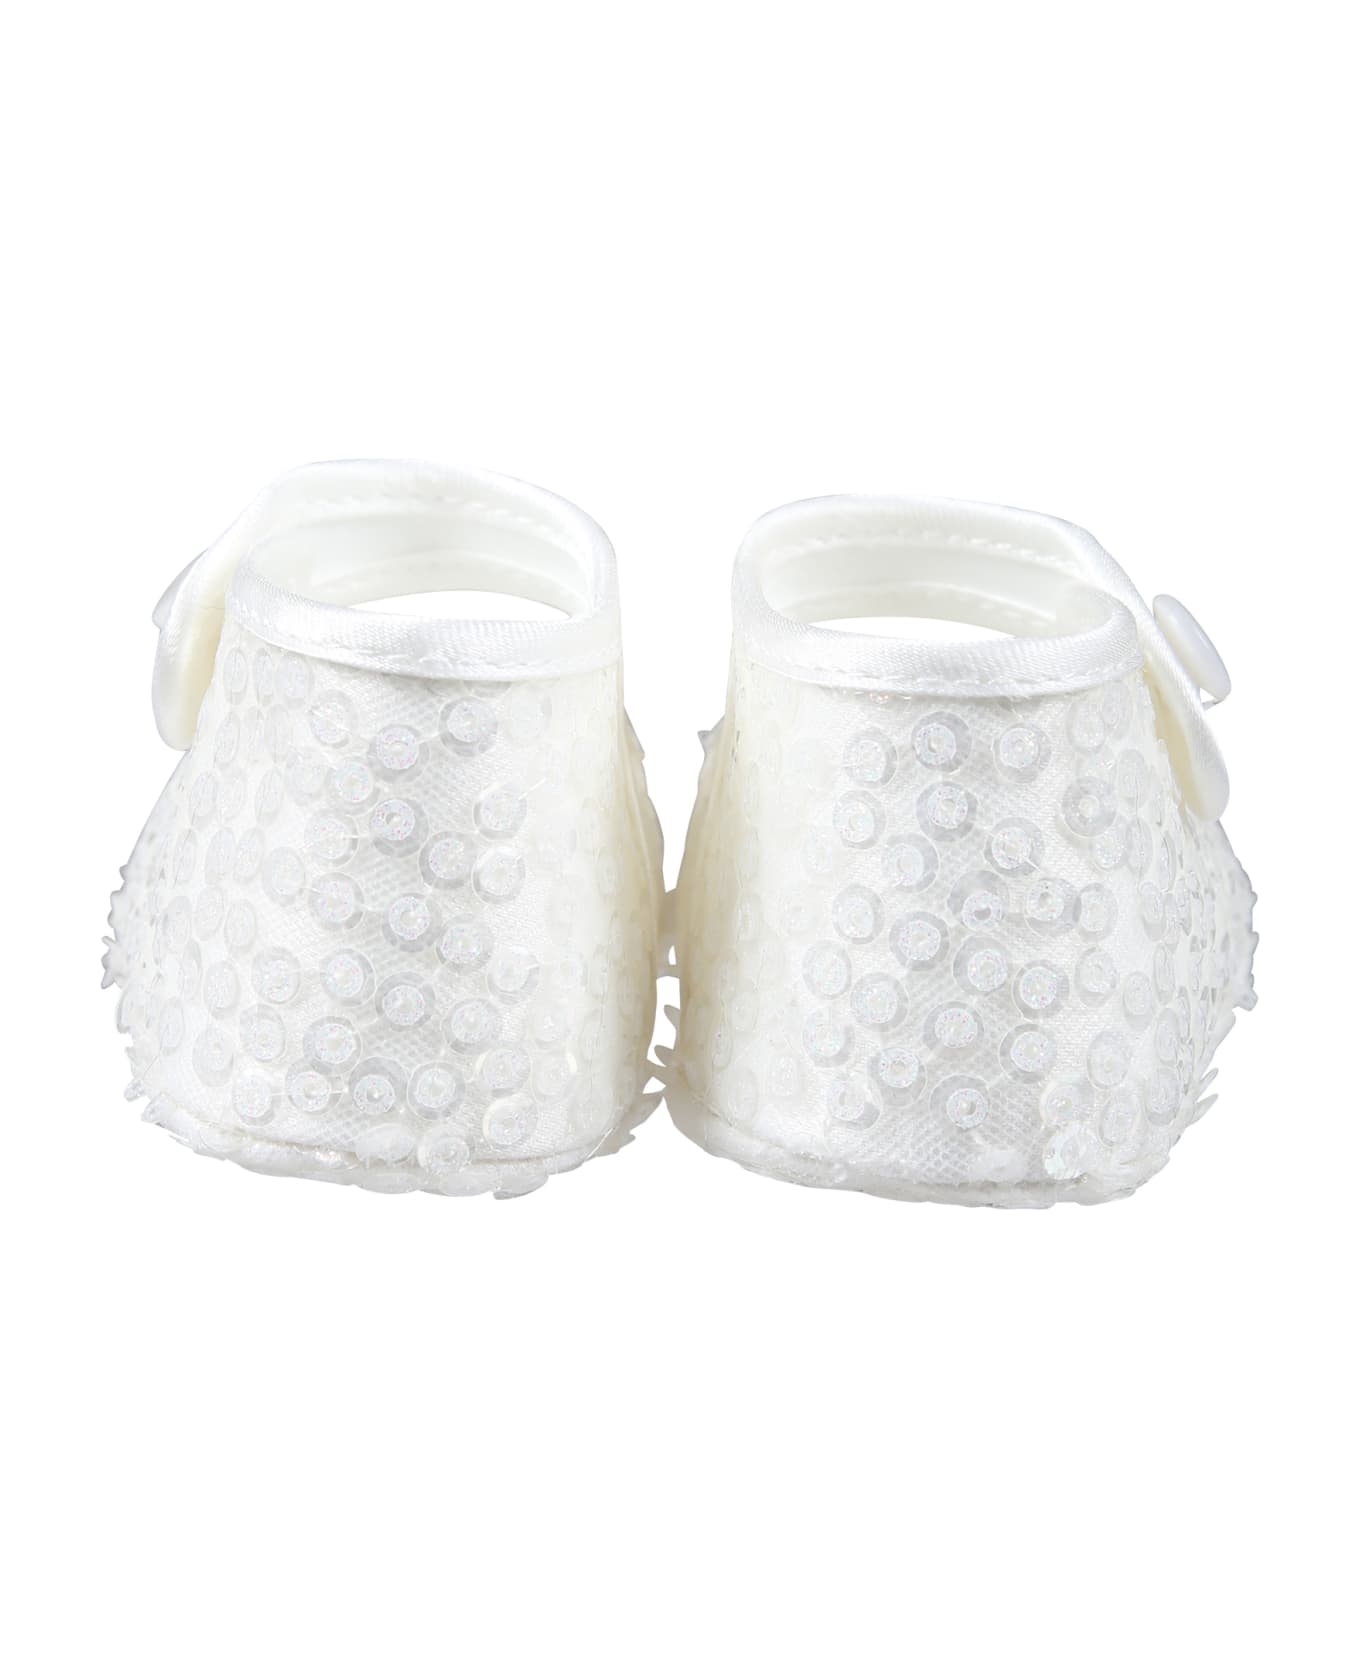 Monnalisa White Ballet Flats For Baby Girl With Sequins - White シューズ